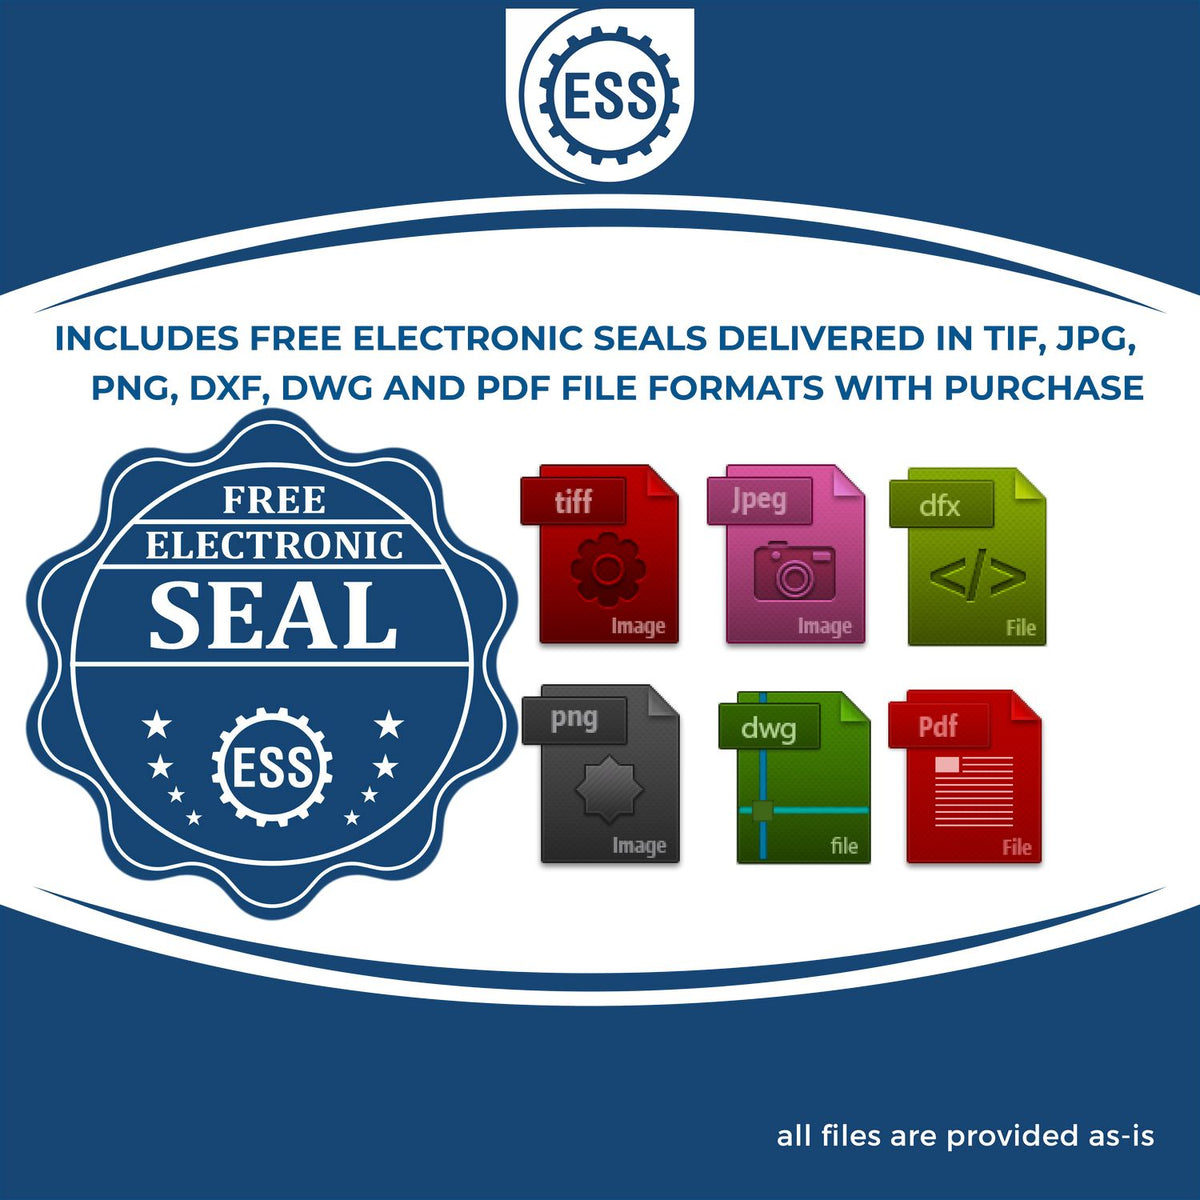 An infographic for the free electronic seal for the Heavy Duty Cast Iron New York Geologist Seal Embosser illustrating the different file type icons such as DXF, DWG, TIF, JPG and PNG.